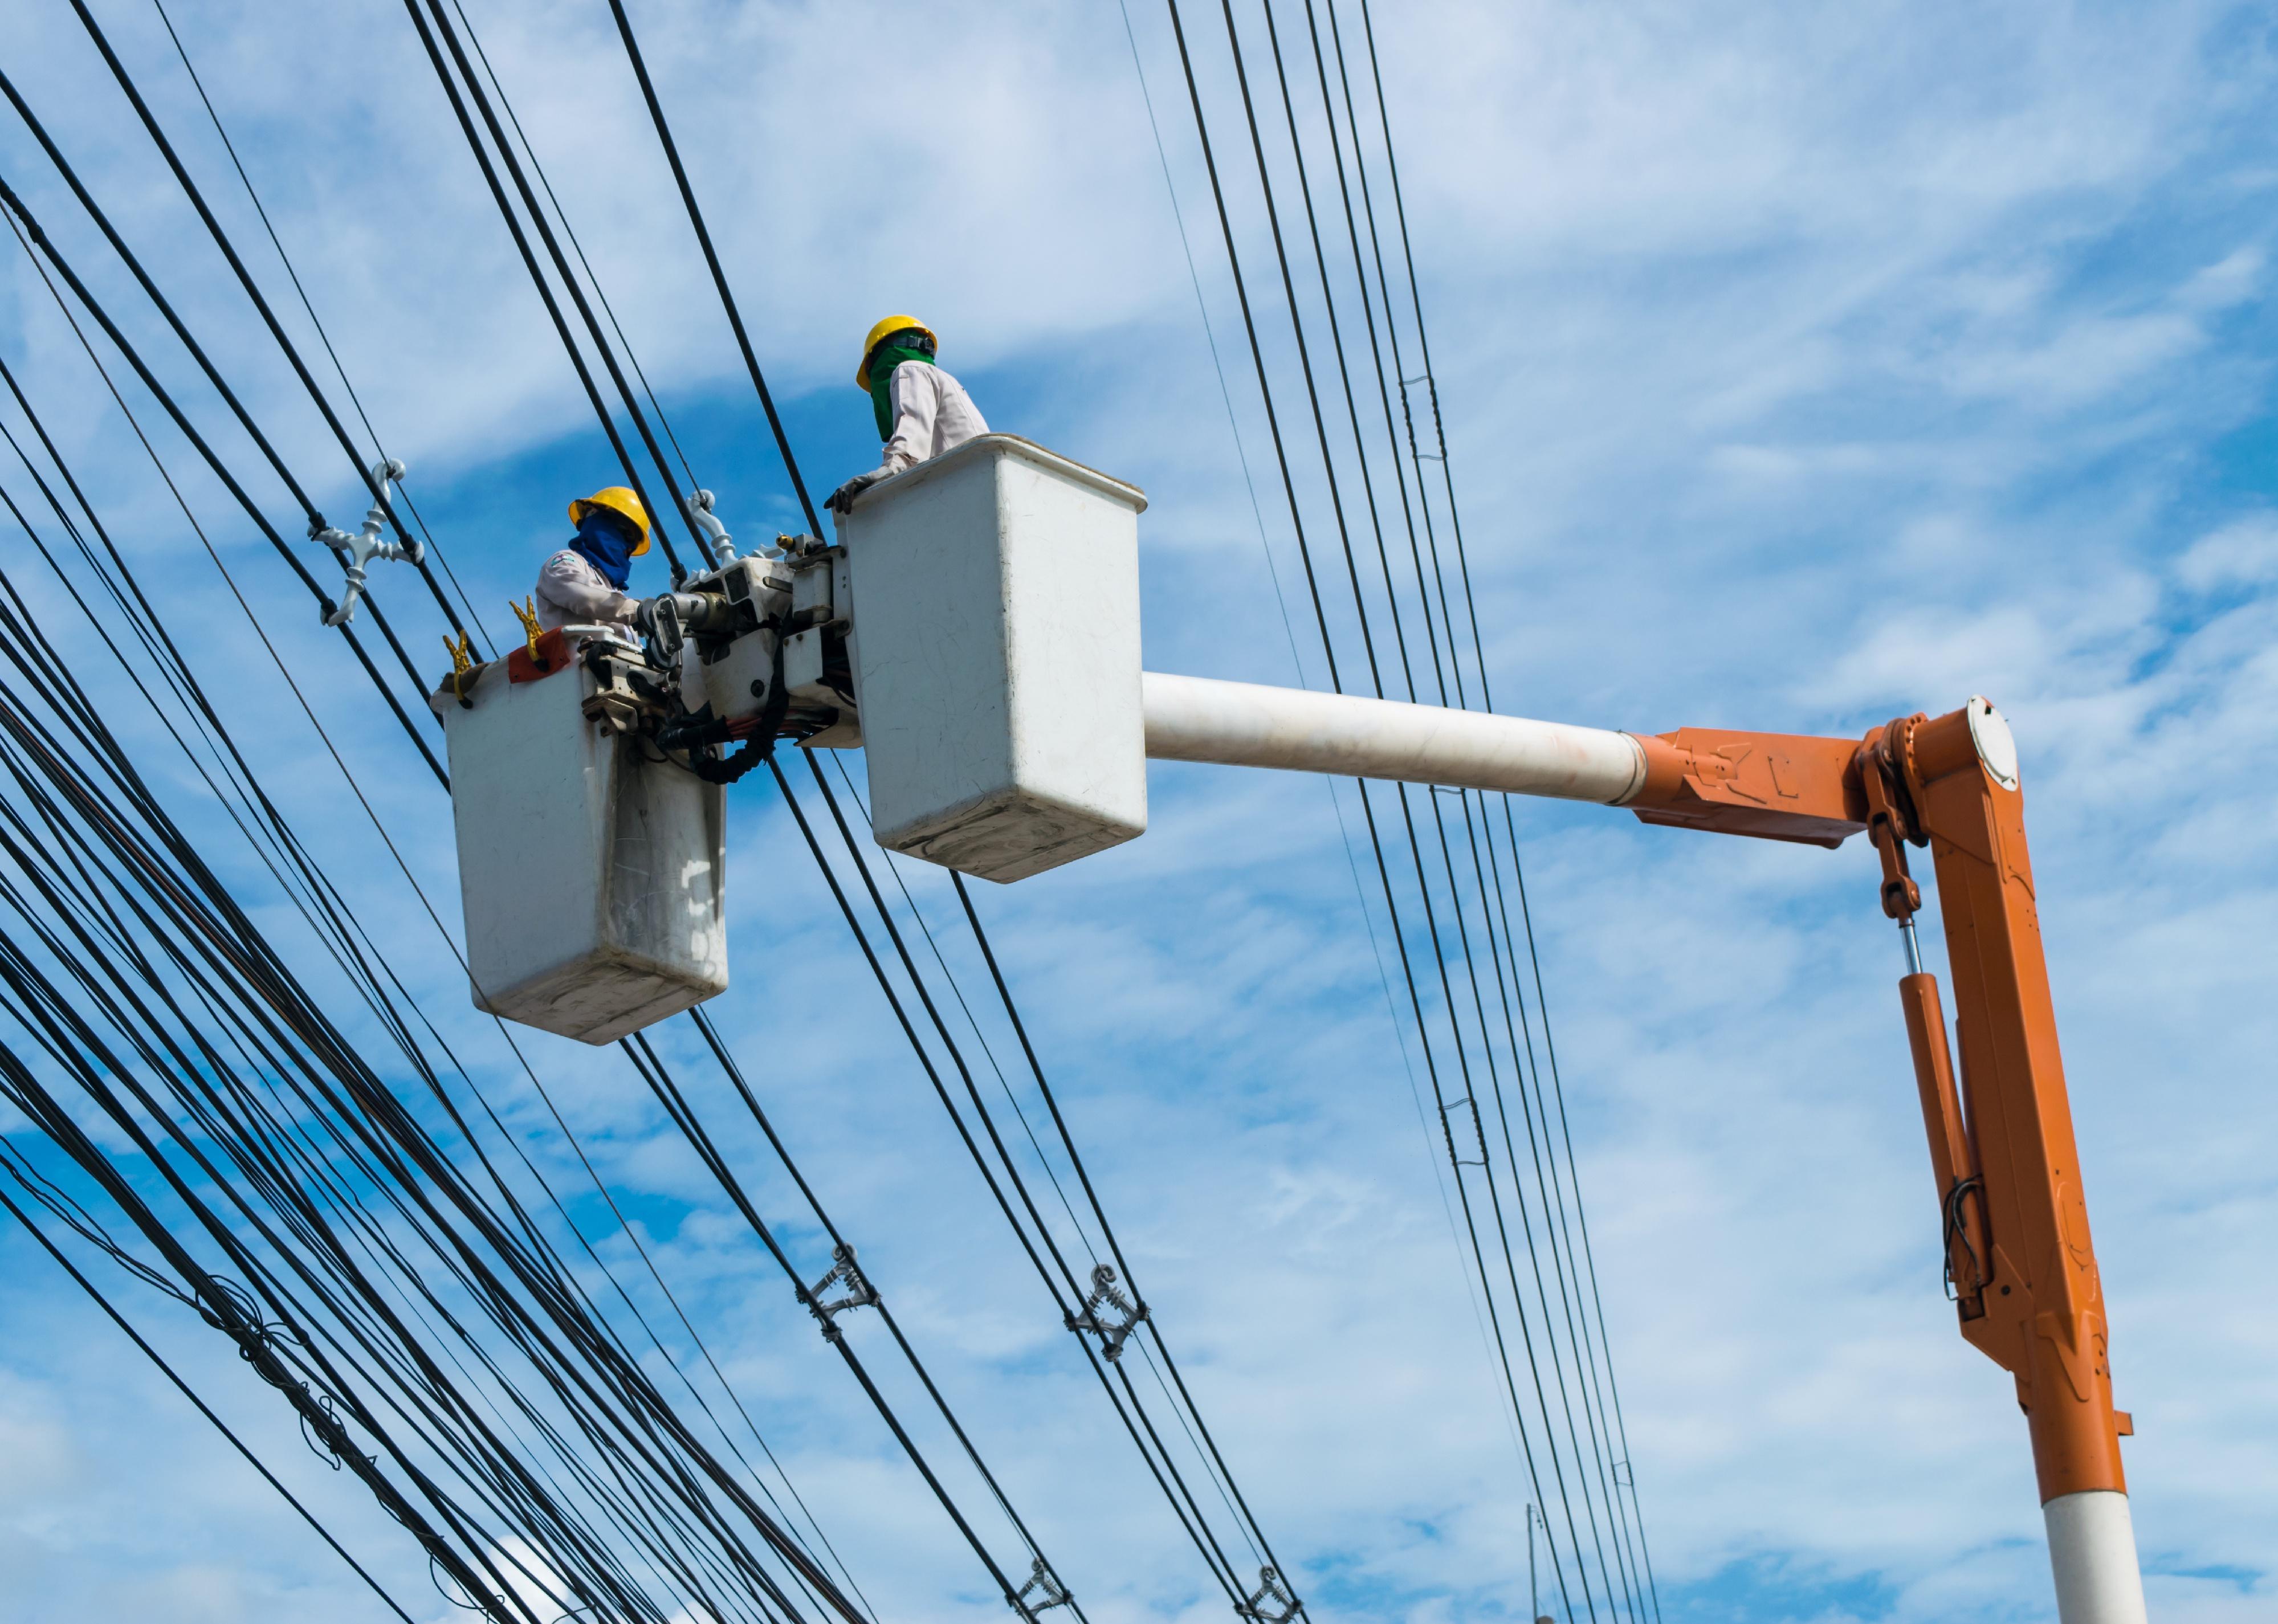 Electricians wiring cable to install and repair power lines.